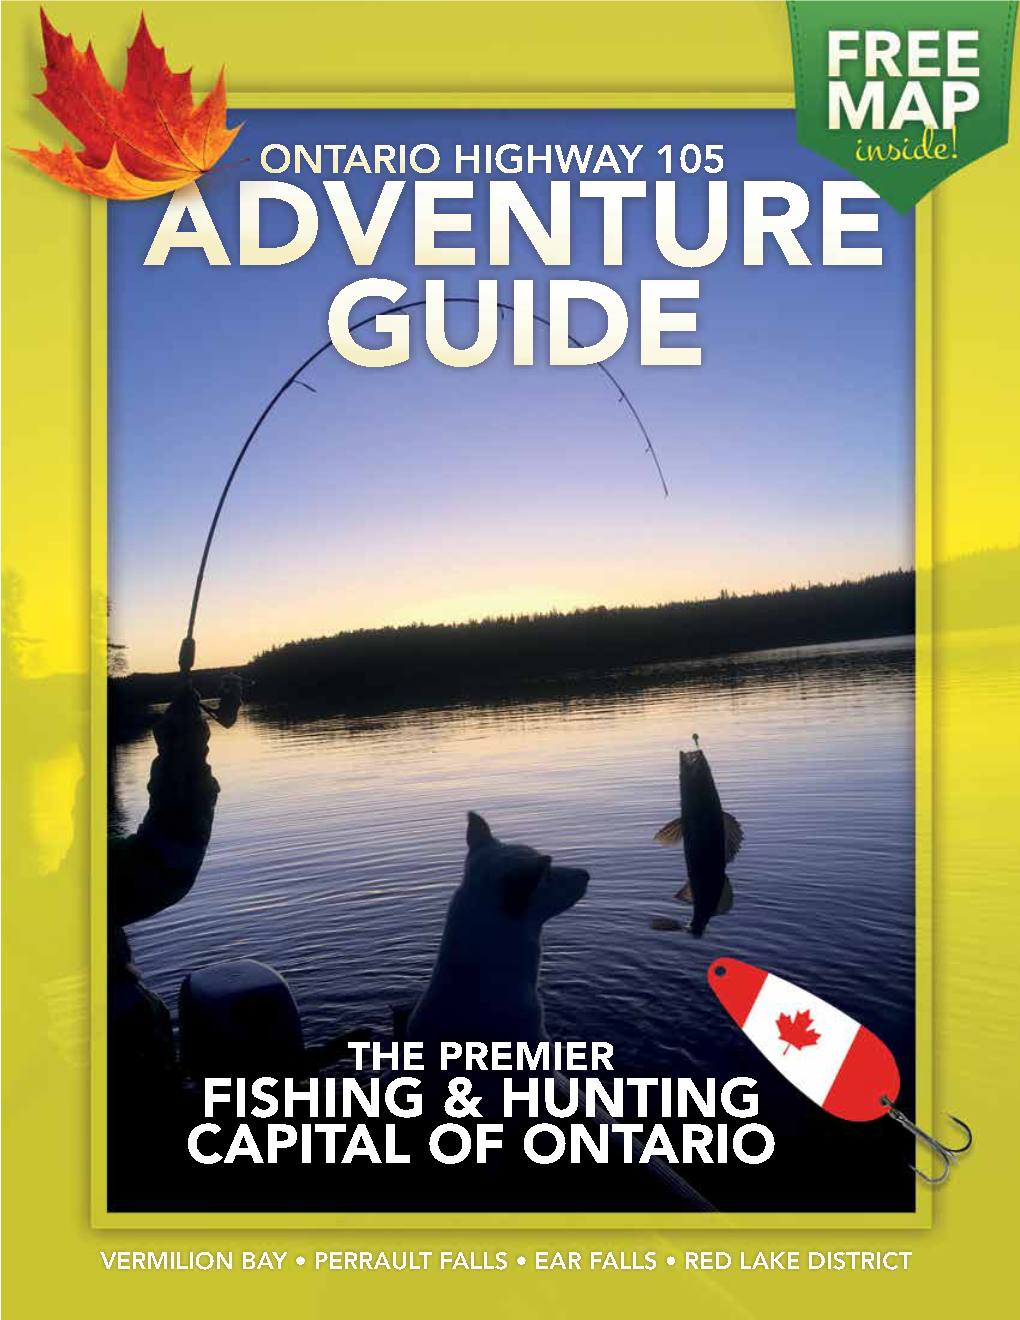 Download the 2020 Highway 105 Adventure Guide